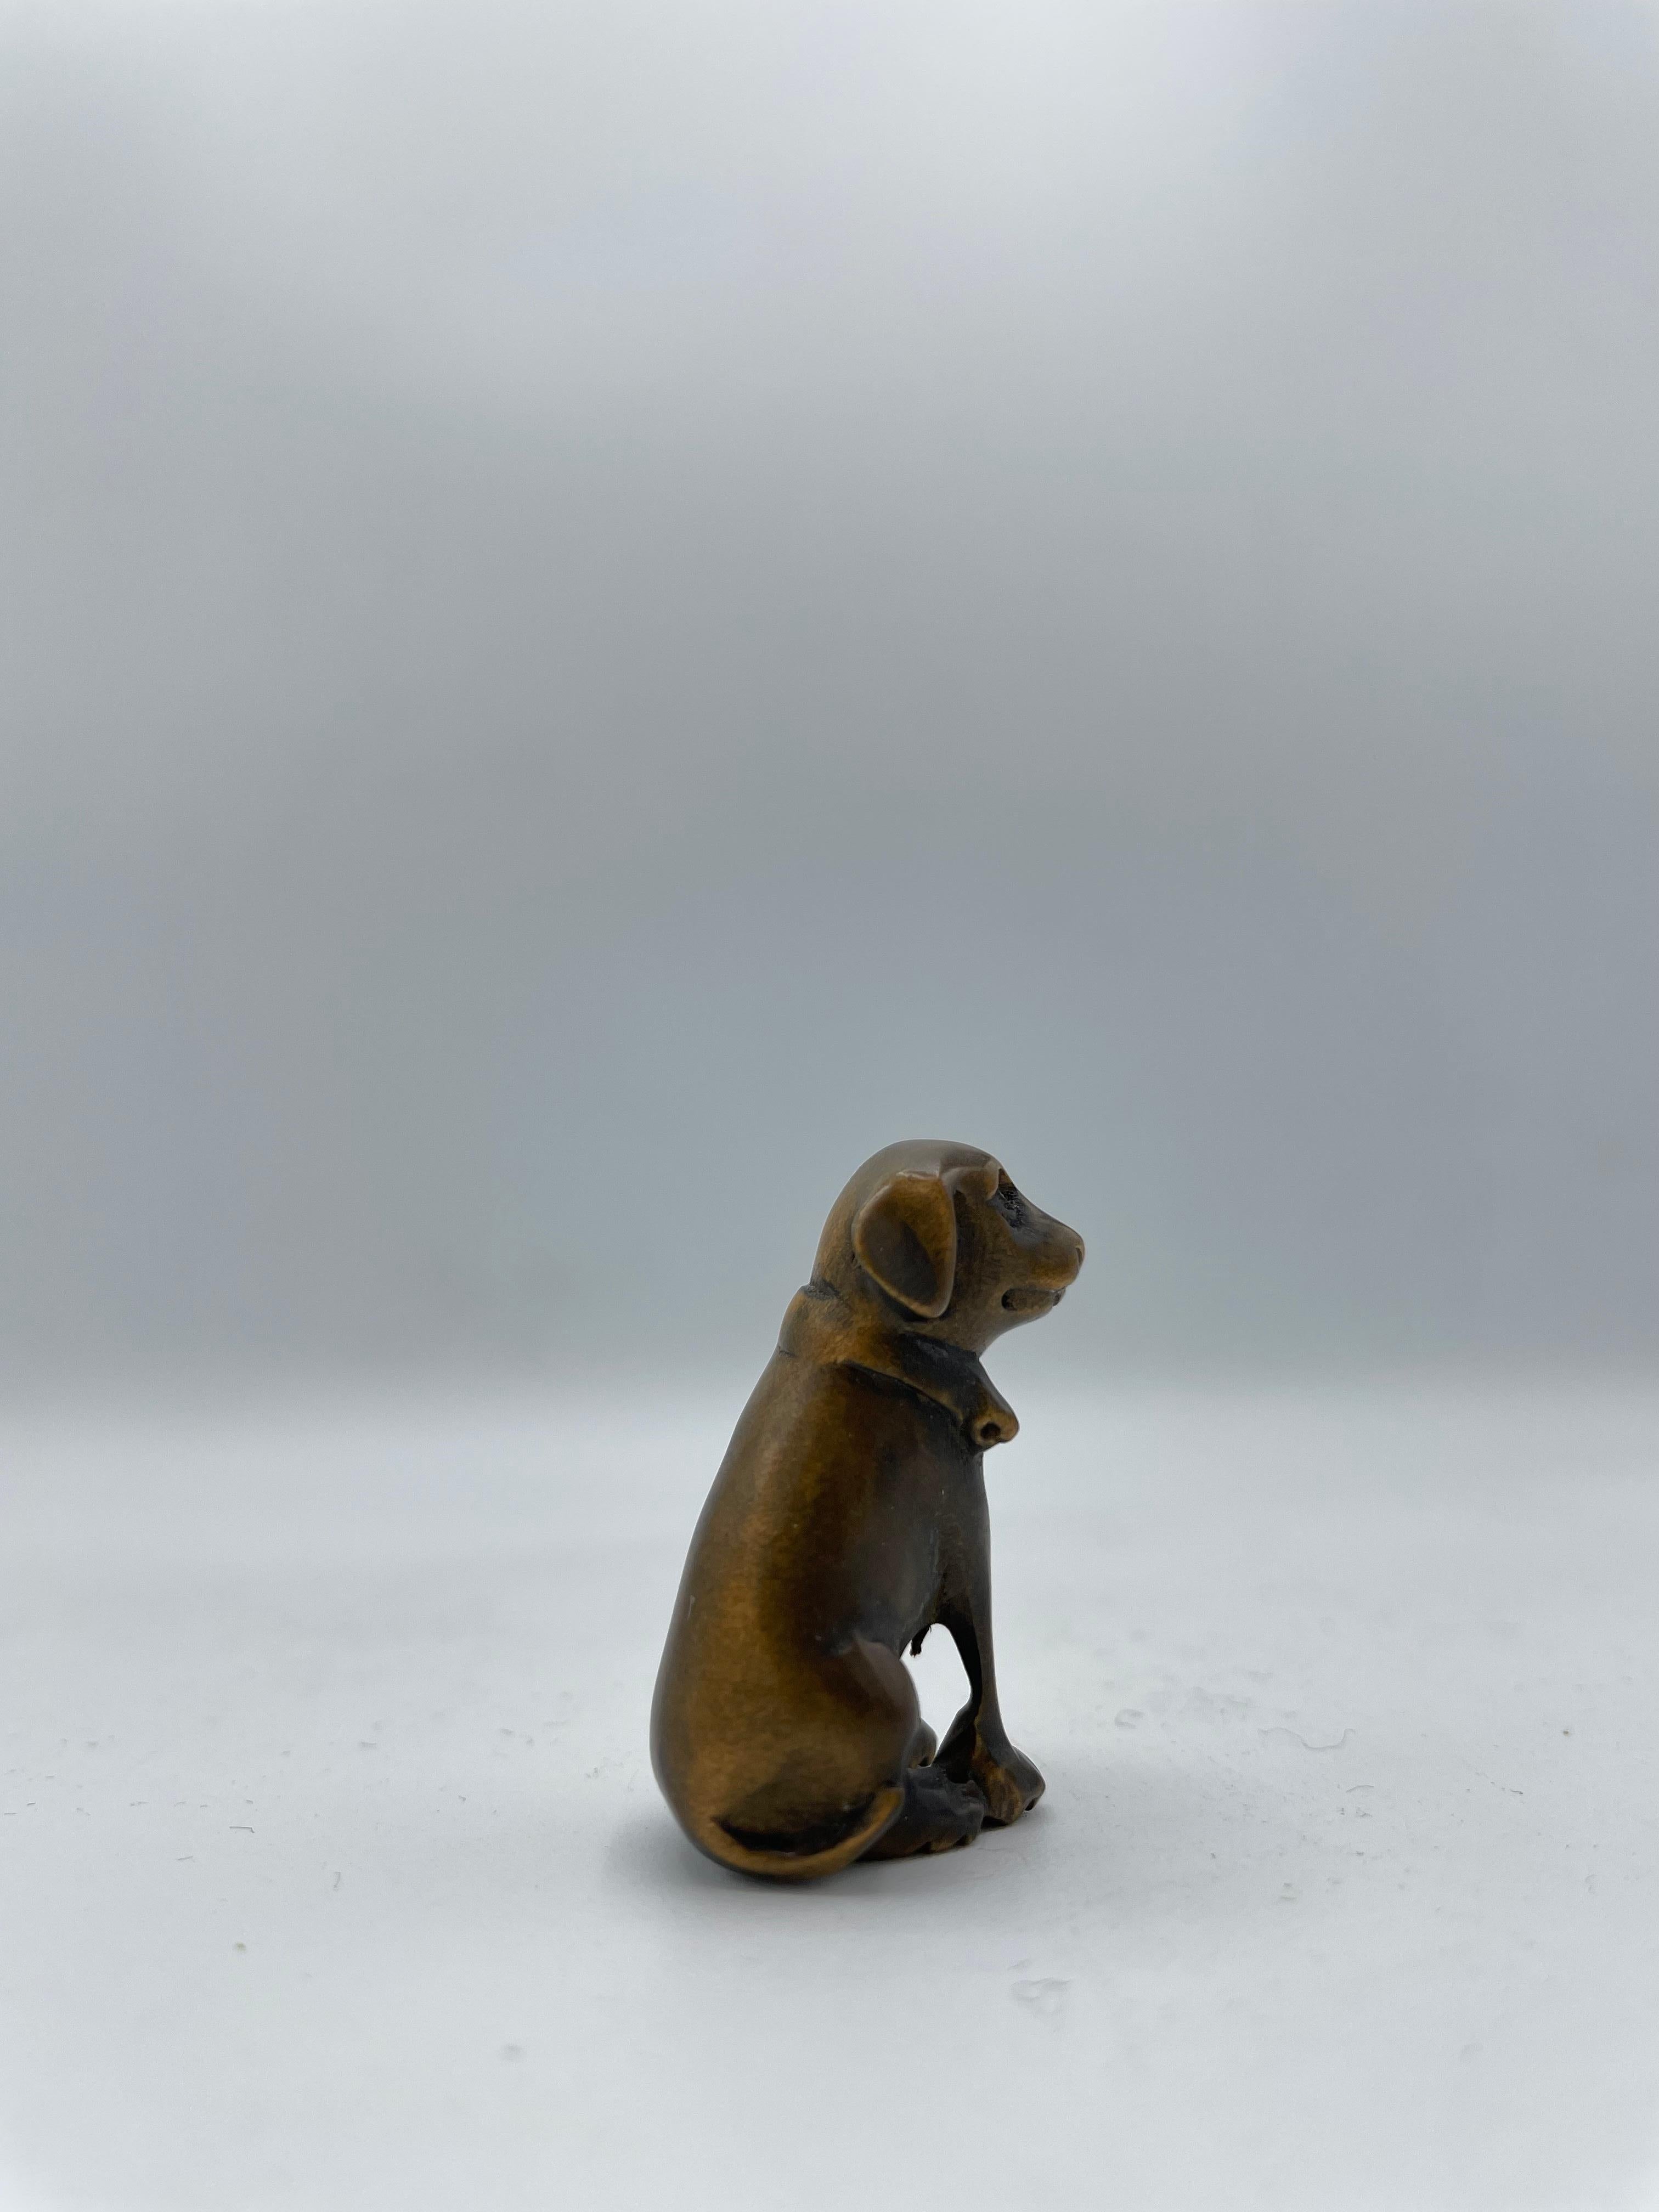 This is an antique netsuke made in Japan around Meiji period 1900s.
Netsuke is a miniature sculpture, originating in 17th century Japan.
Initially a simply-carved button fastener on the cords of an inro box, netsuke later developed into ornately